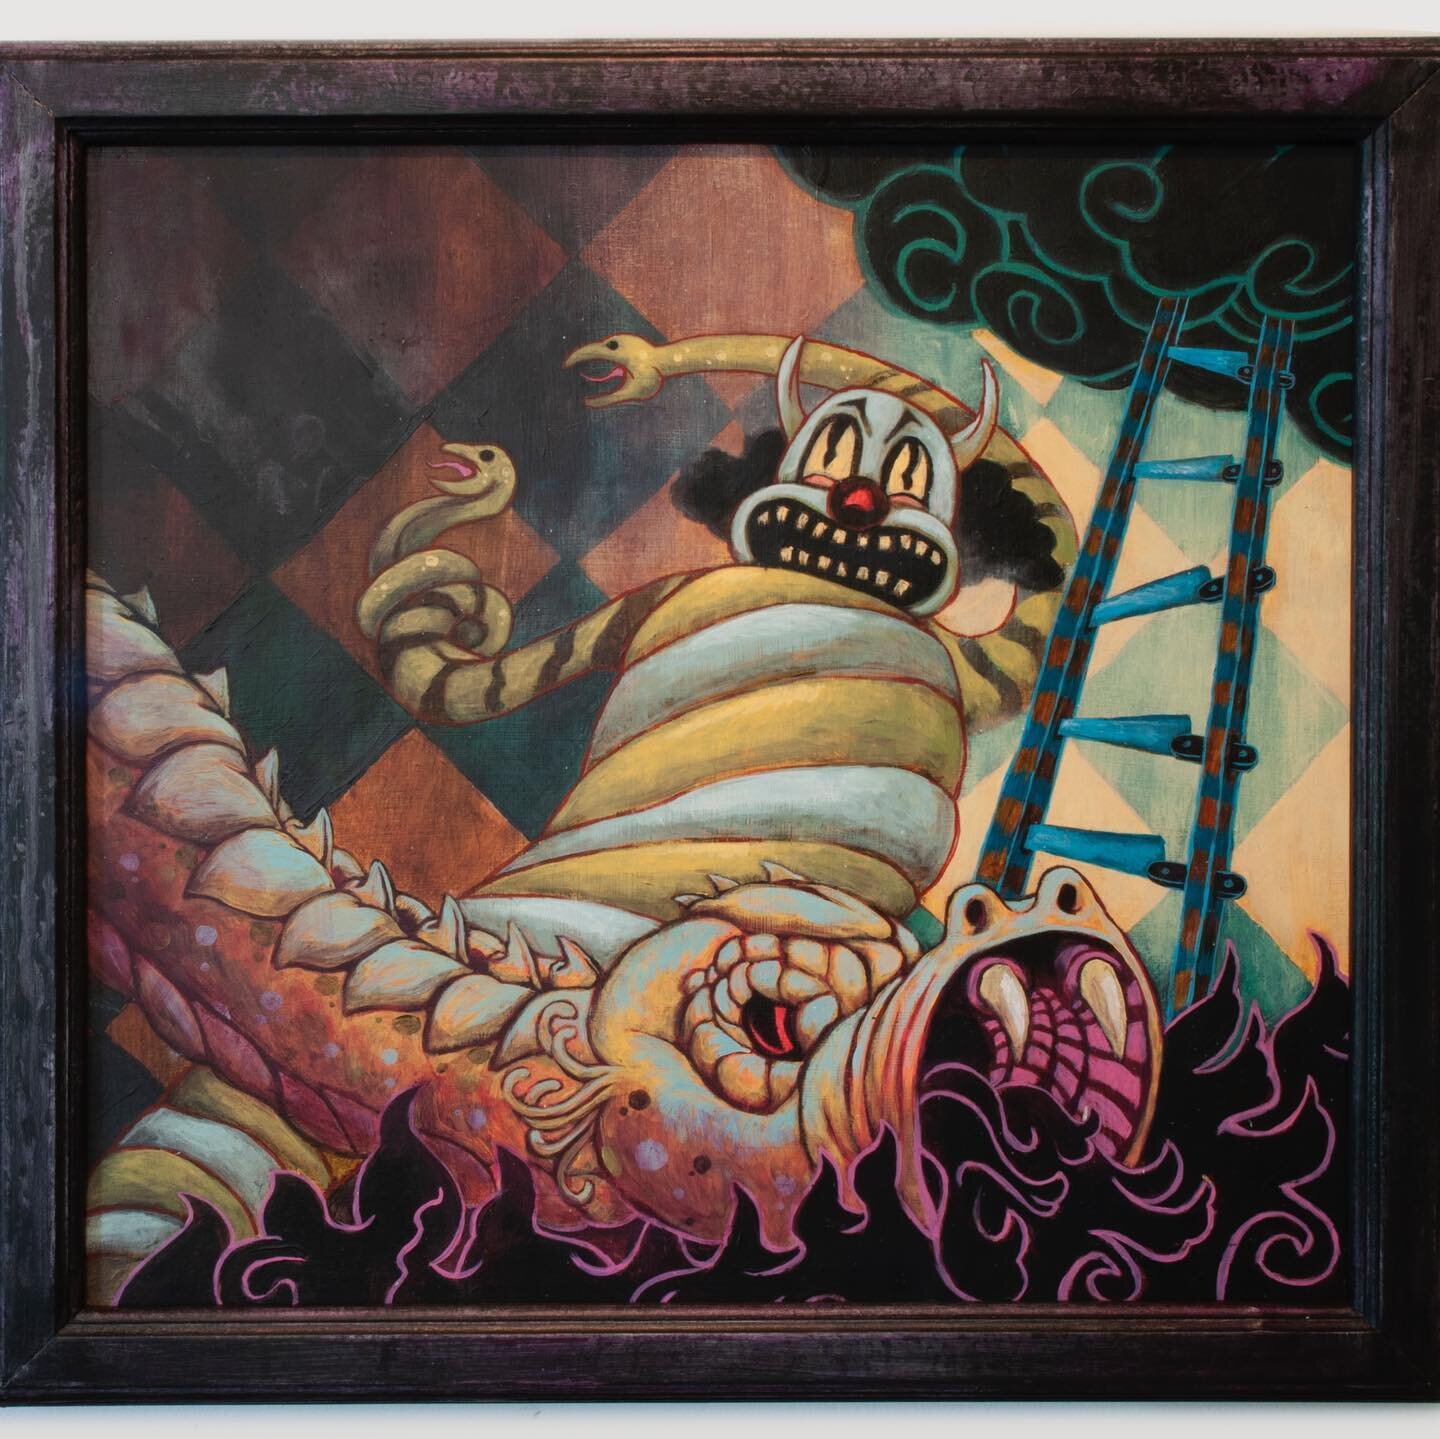 Flash WAY back Friday&hellip; to 2006 when I made this Snakes and Ladders painting for None More Black&rsquo;s This is Satire. This work will be @thetoycantina for the next little while. Thanks to @jag13badluck for putting this rad show together! Sli